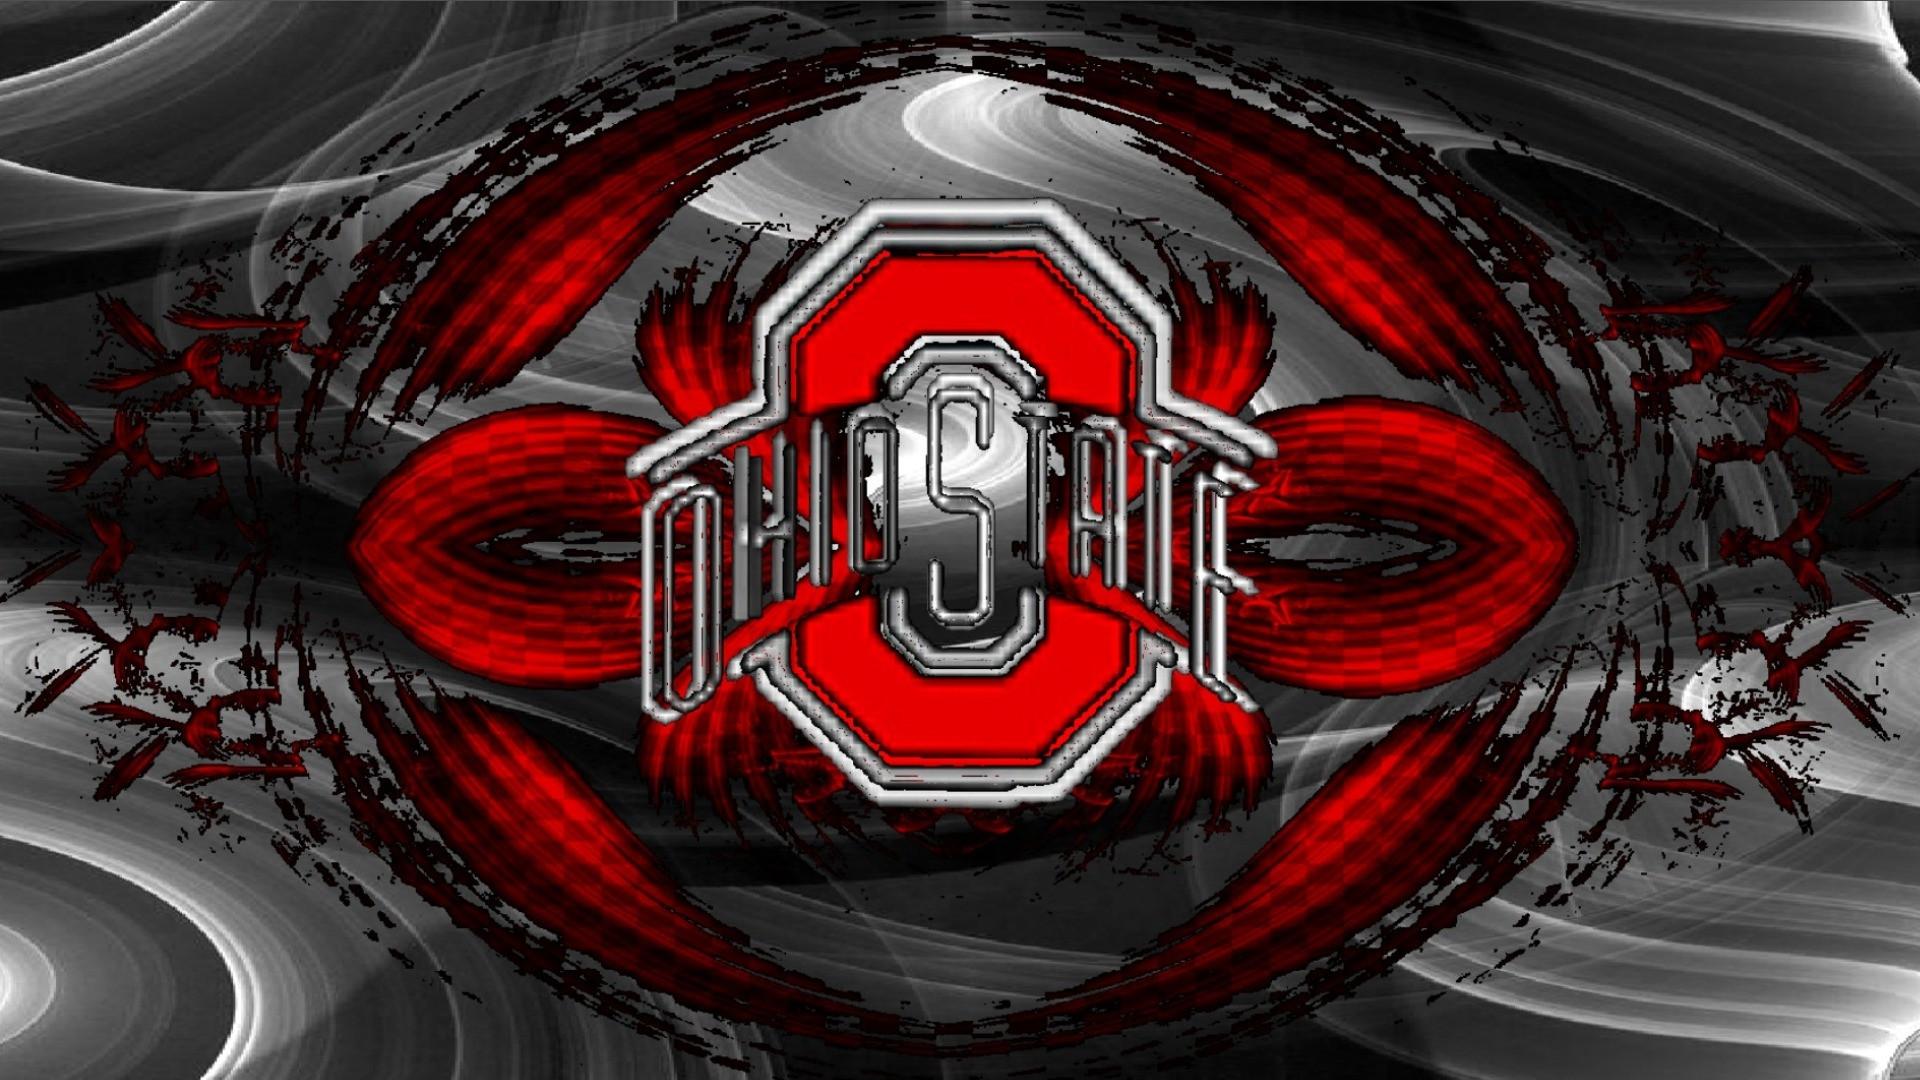 Ohio State Wallpapers